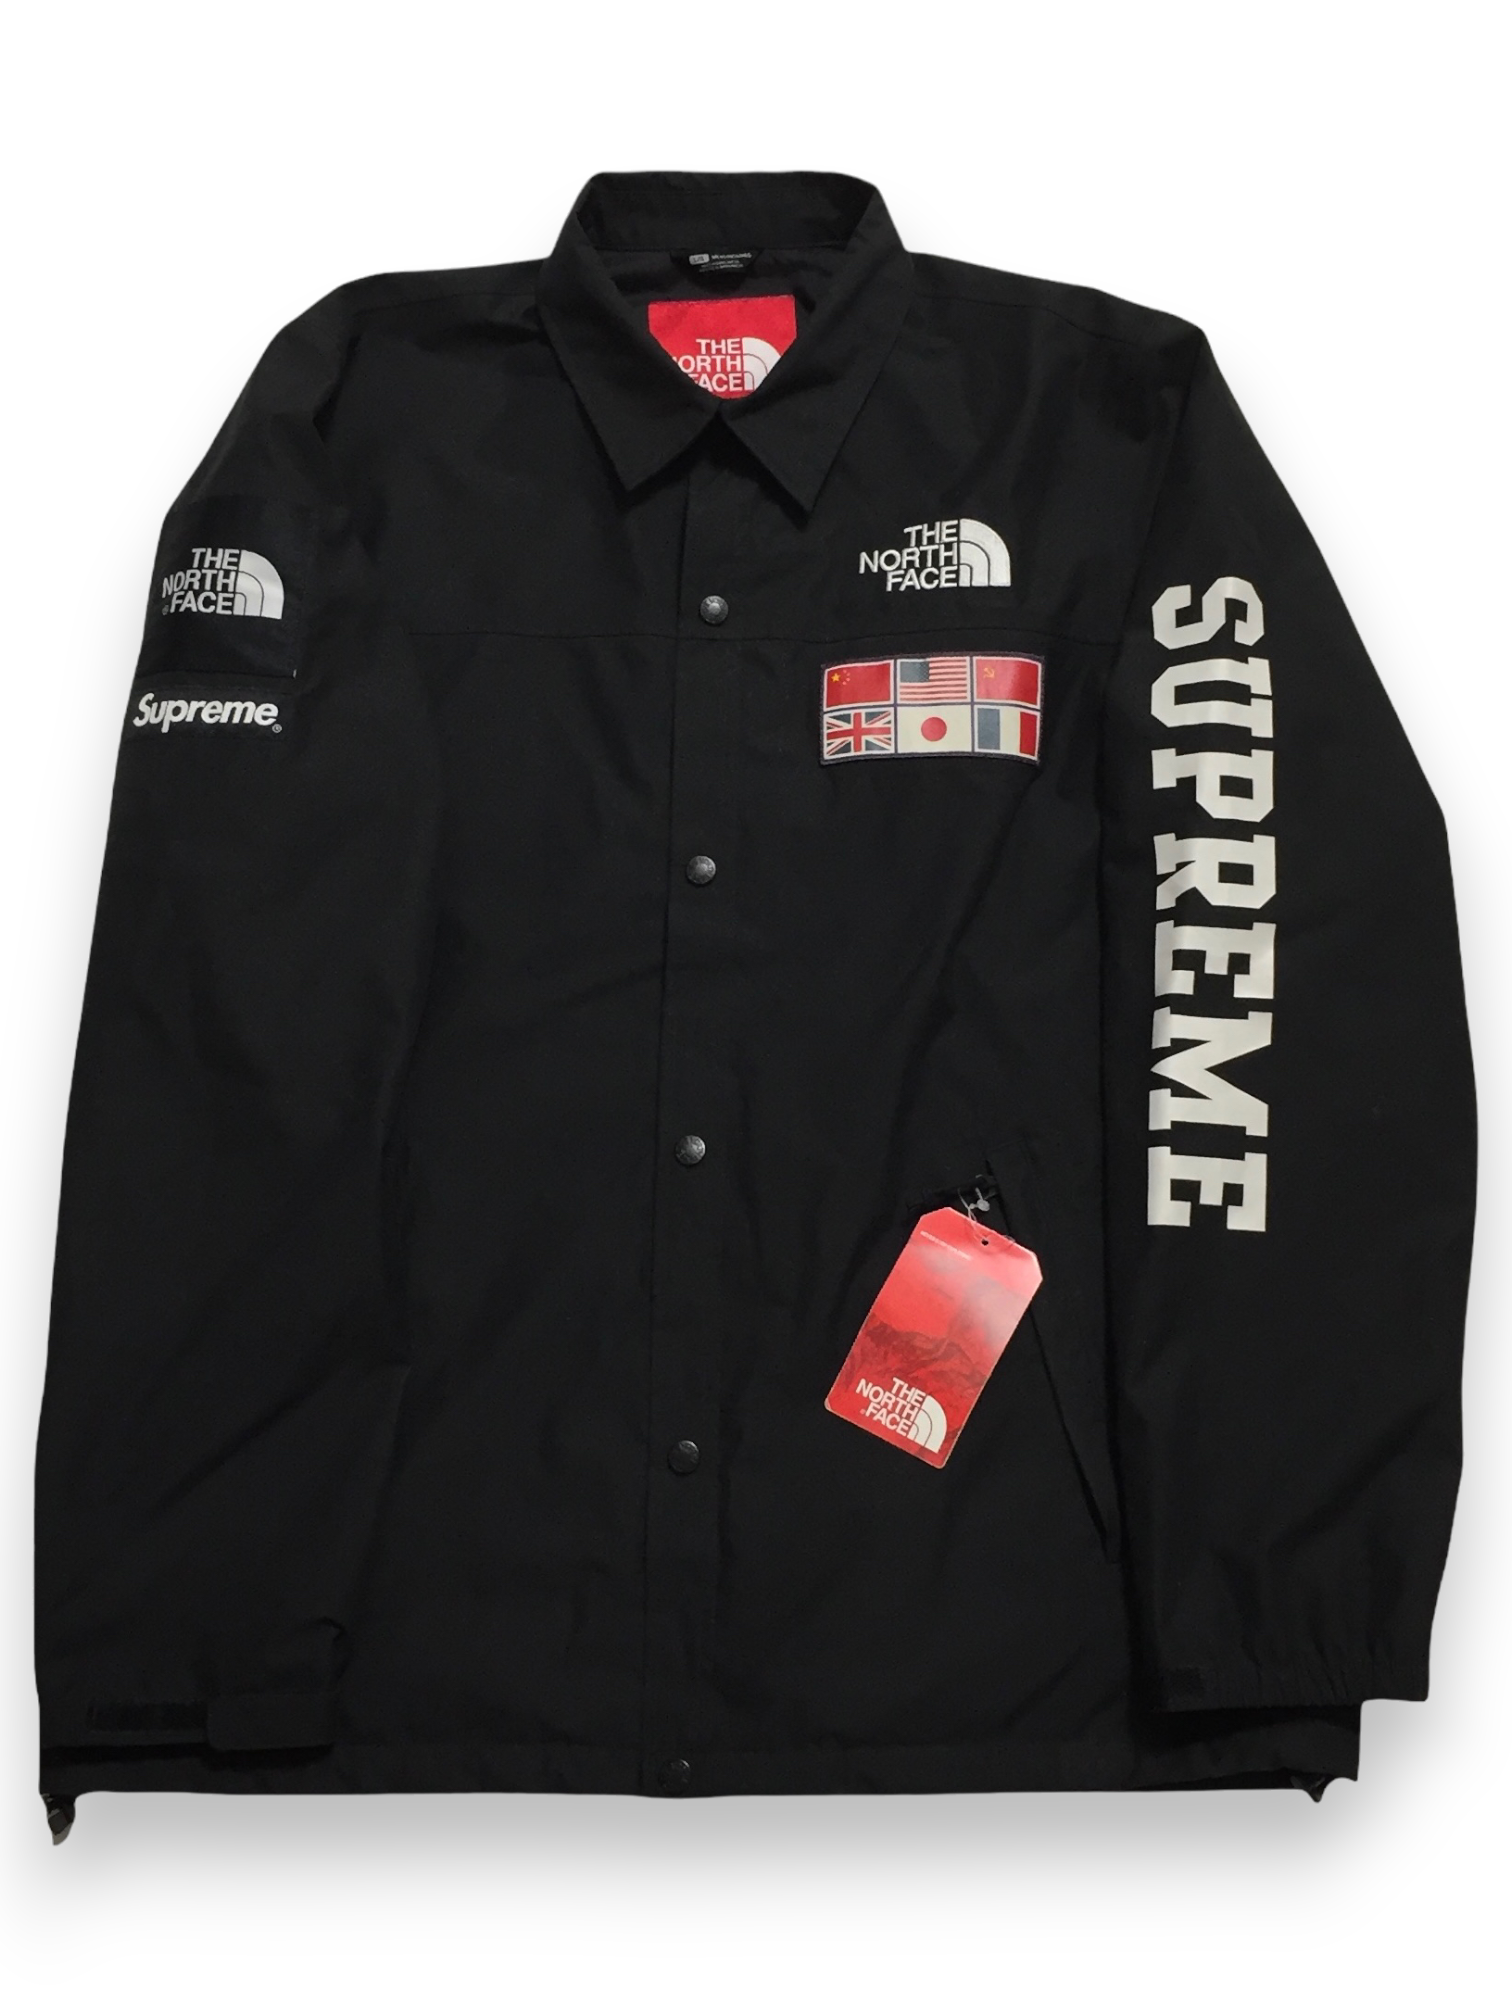 2014 Supreme x The North Face Black Expedition Coach